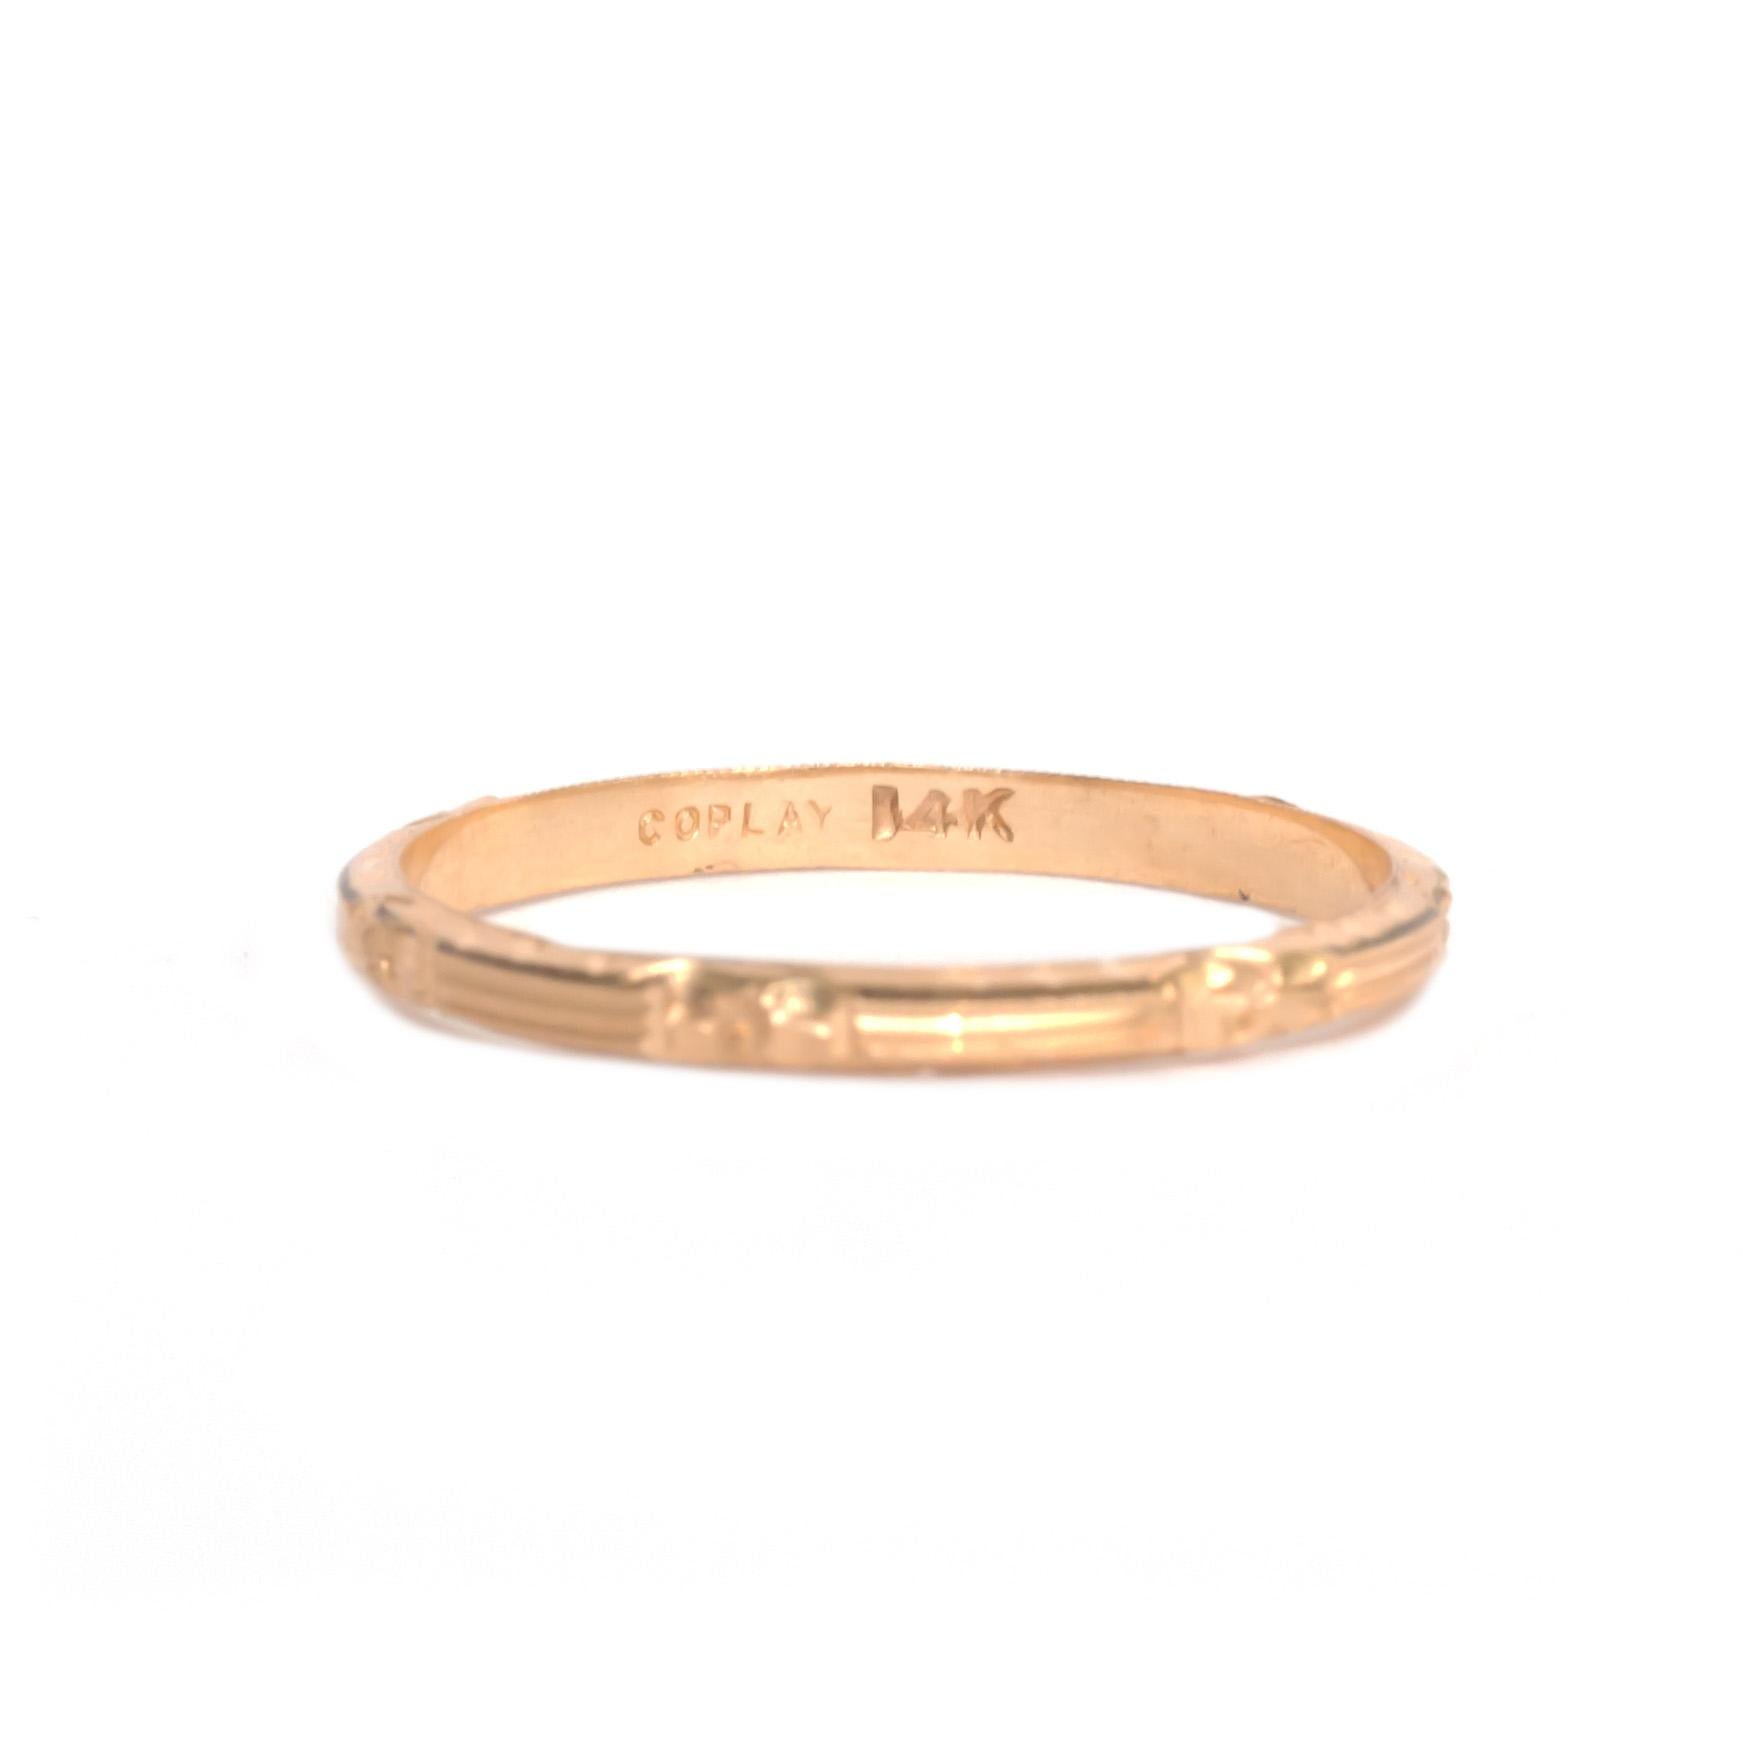 Item Details: 
Ring Size: 7.5
Metal Type: 14 karat Yellow Gold [Hallmark & Tested]
Weight:  1.1 grams

Finger to Top of Stone Measurement: 1.1mm
Condition:  Excellent